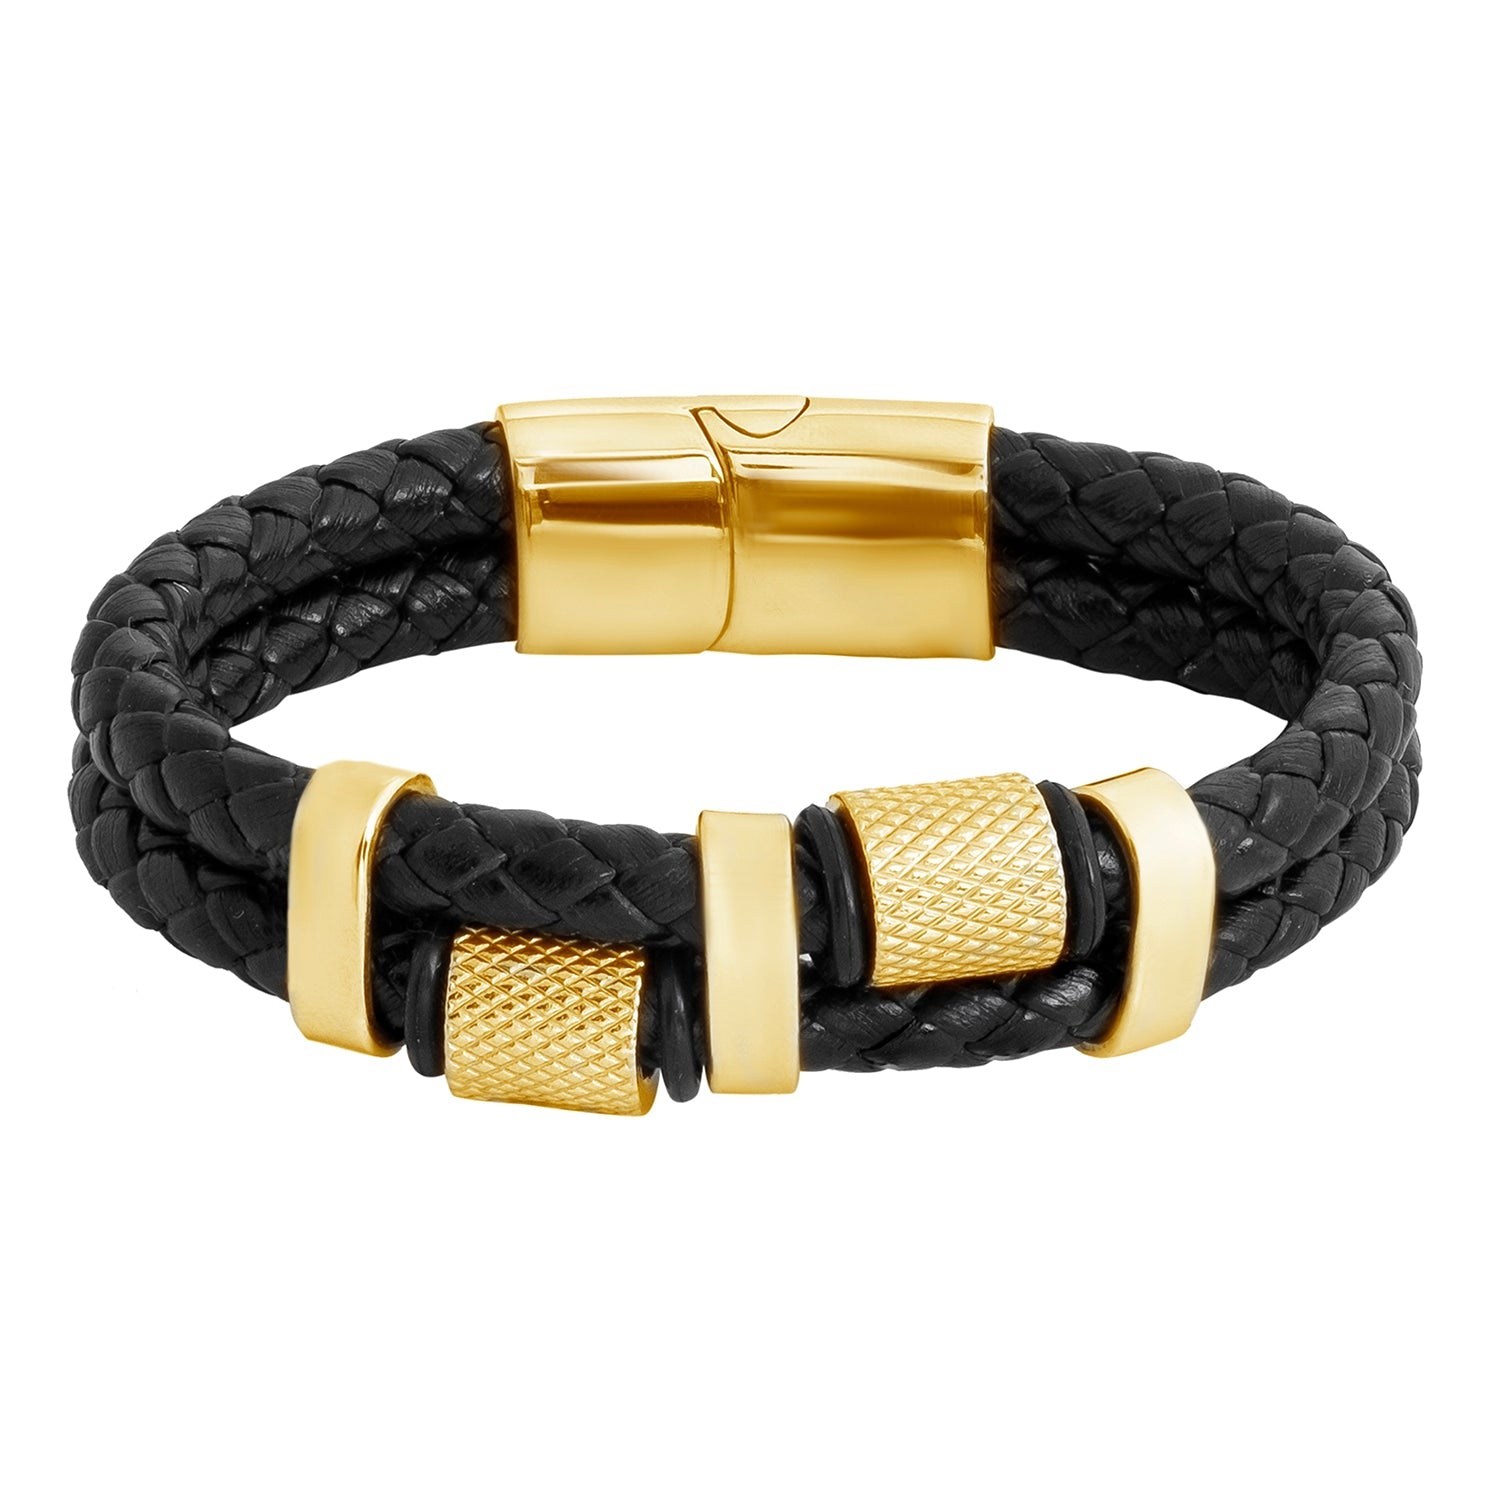 18k Yellow Gold Filled Mens Mesh Bracelet With Dragon Head Design Hip Hop  Wrist Chain Link Jewelry From Blingfashion, $12.95 | DHgate.Com